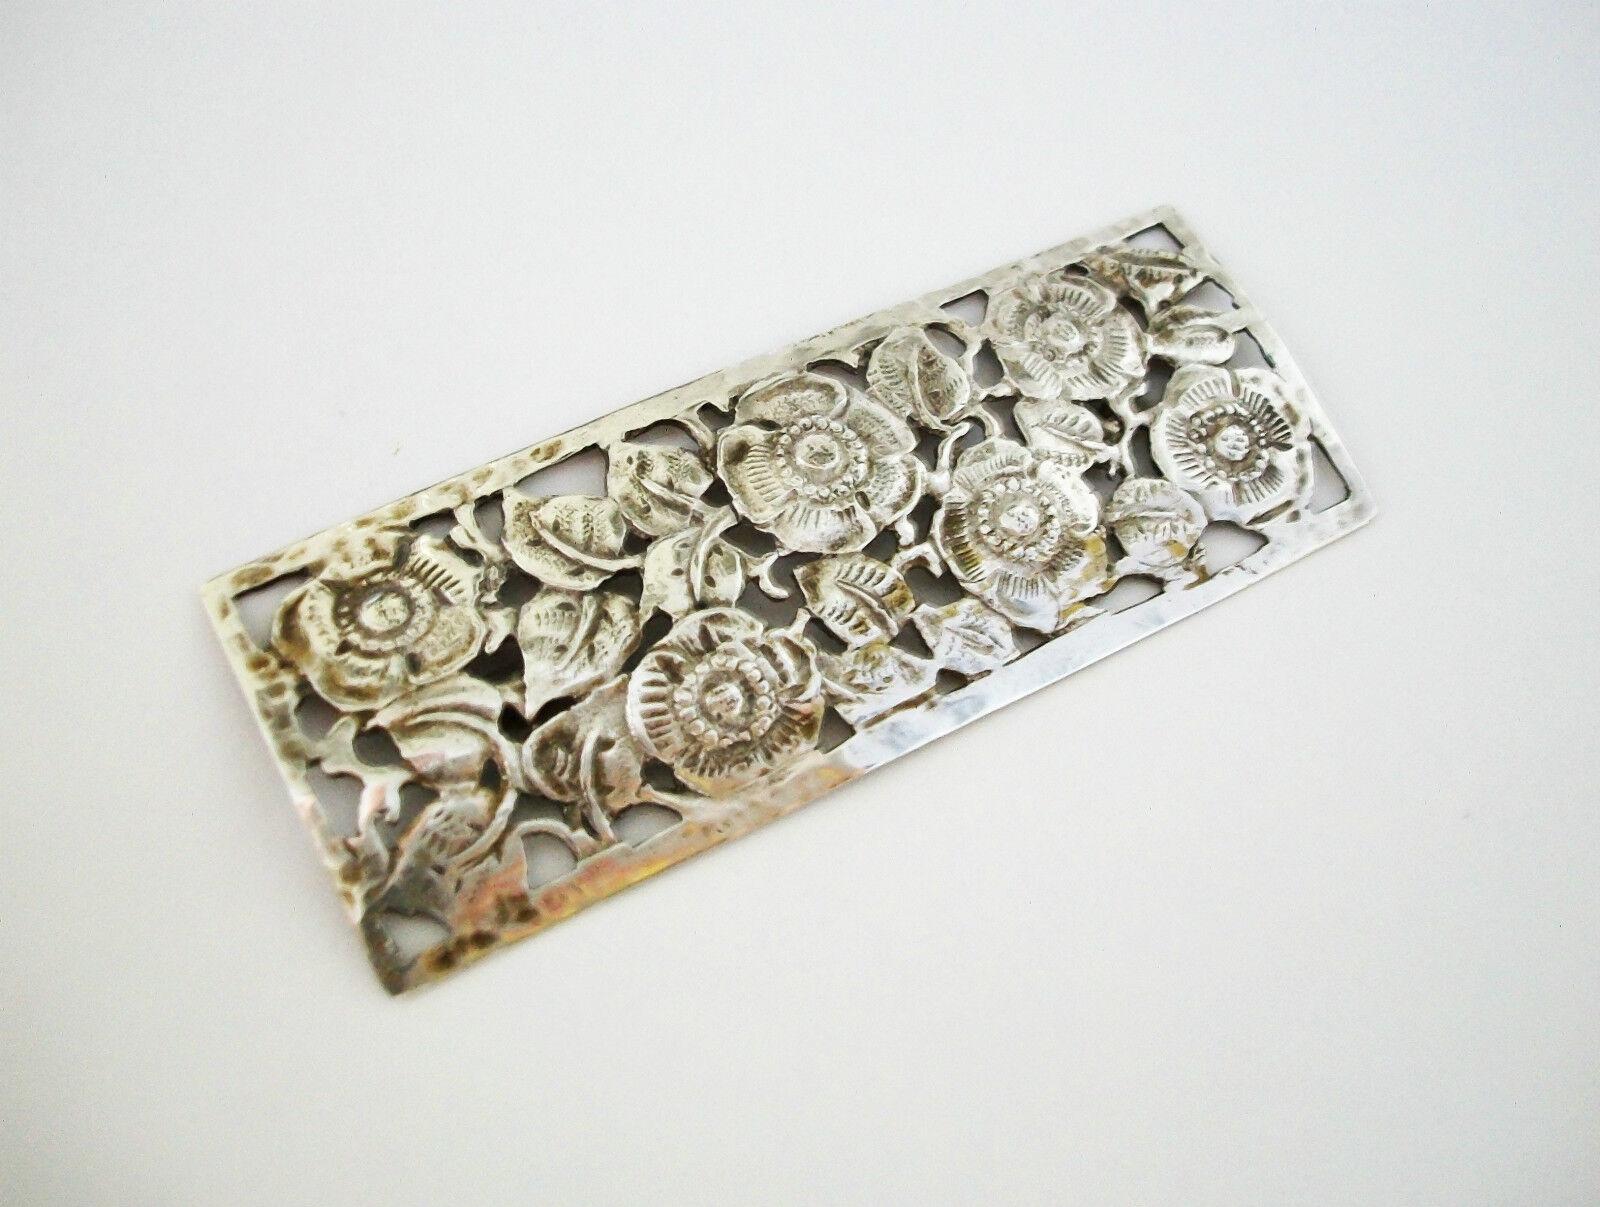 Antique fine quality Art Nouveau / Jugendstil silver poppy brooch - hand made - featuring a pierced design with hand tooled details - hinged pin to the back - unsigned - stamped '800' verso - Germany - circa 1900.

Excellent antique condition -